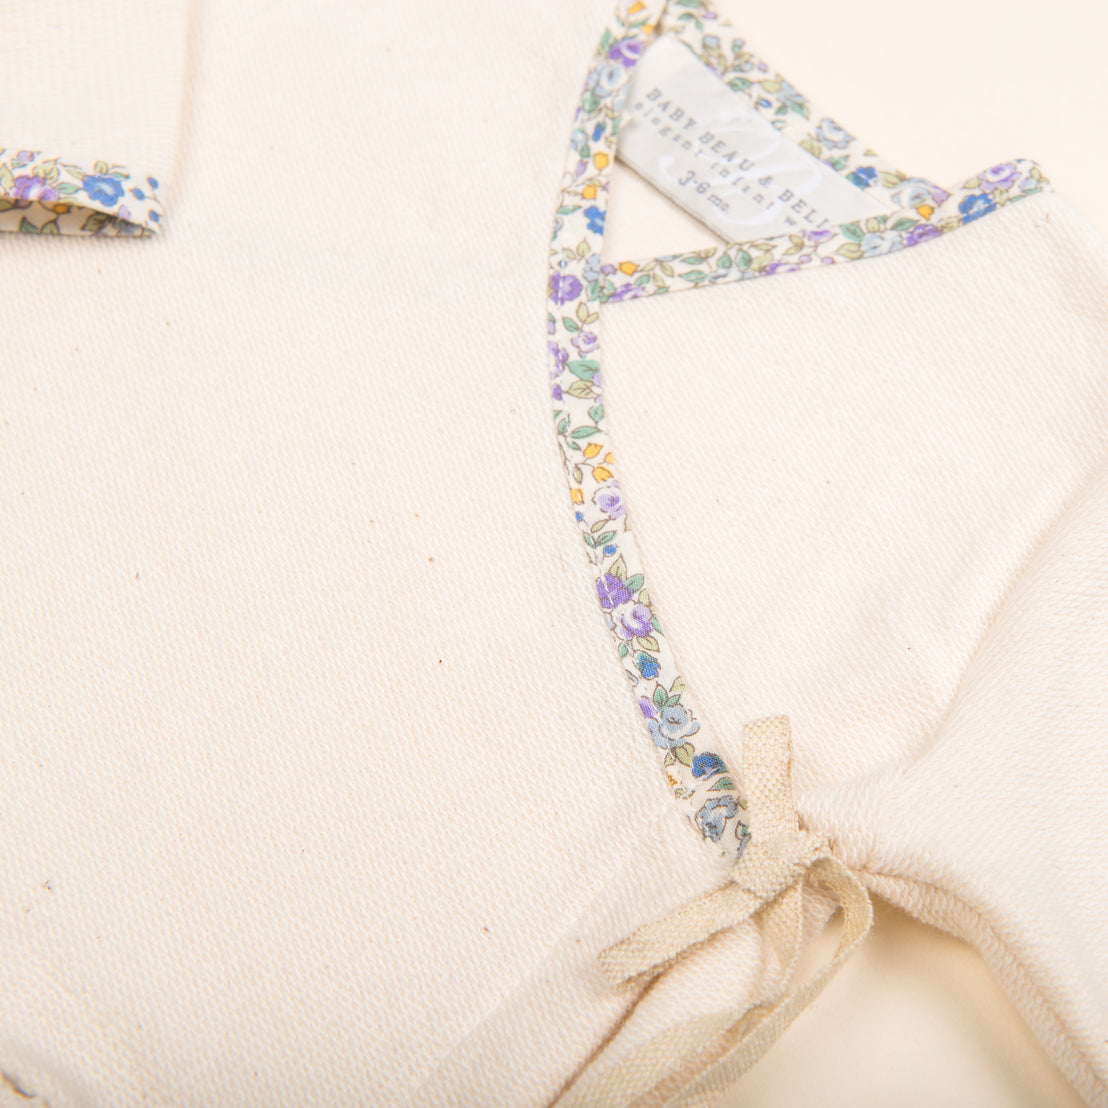 Close-up of a Petite Fleur Wrap Top & Pants, an upscale, handcrafted beige textile with a delicate floral trim and a tag reading "made in Italy," featuring a tied fabric bow at the seam.